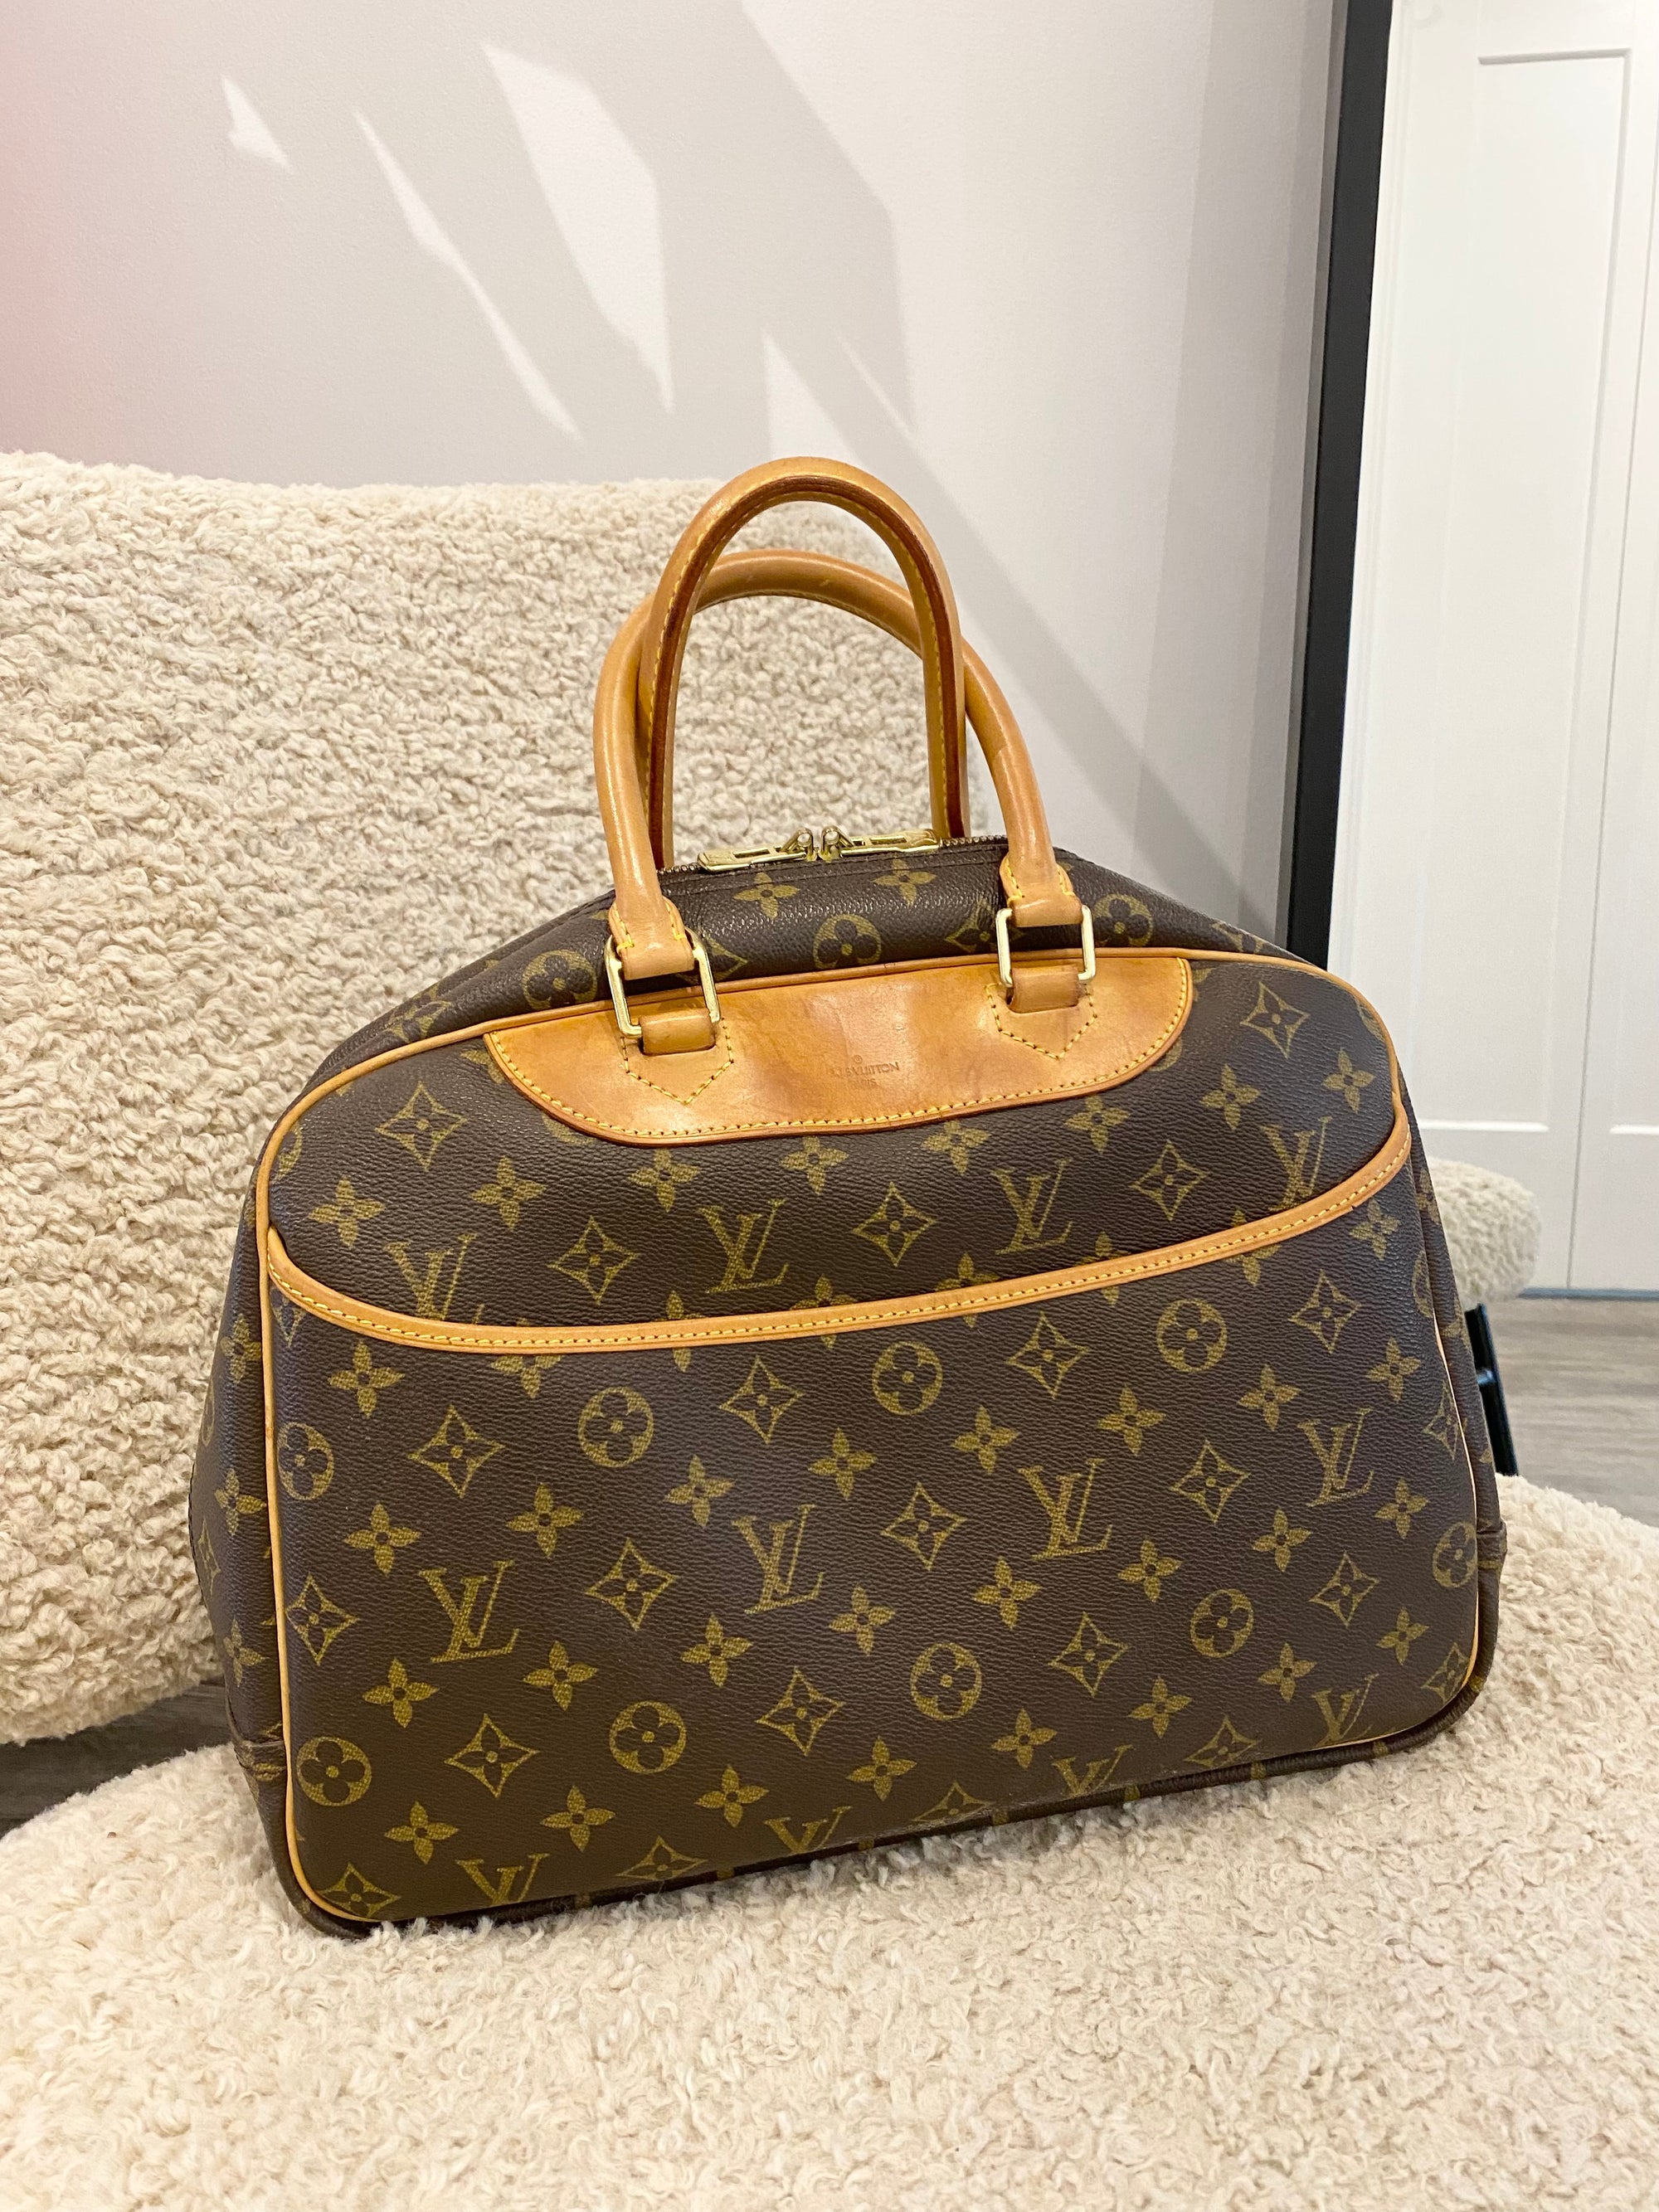 LV Deauville❣️ Priced 2 Sell NO OFFERS❣️FAB ICON Timeless Classic Retail  $2800